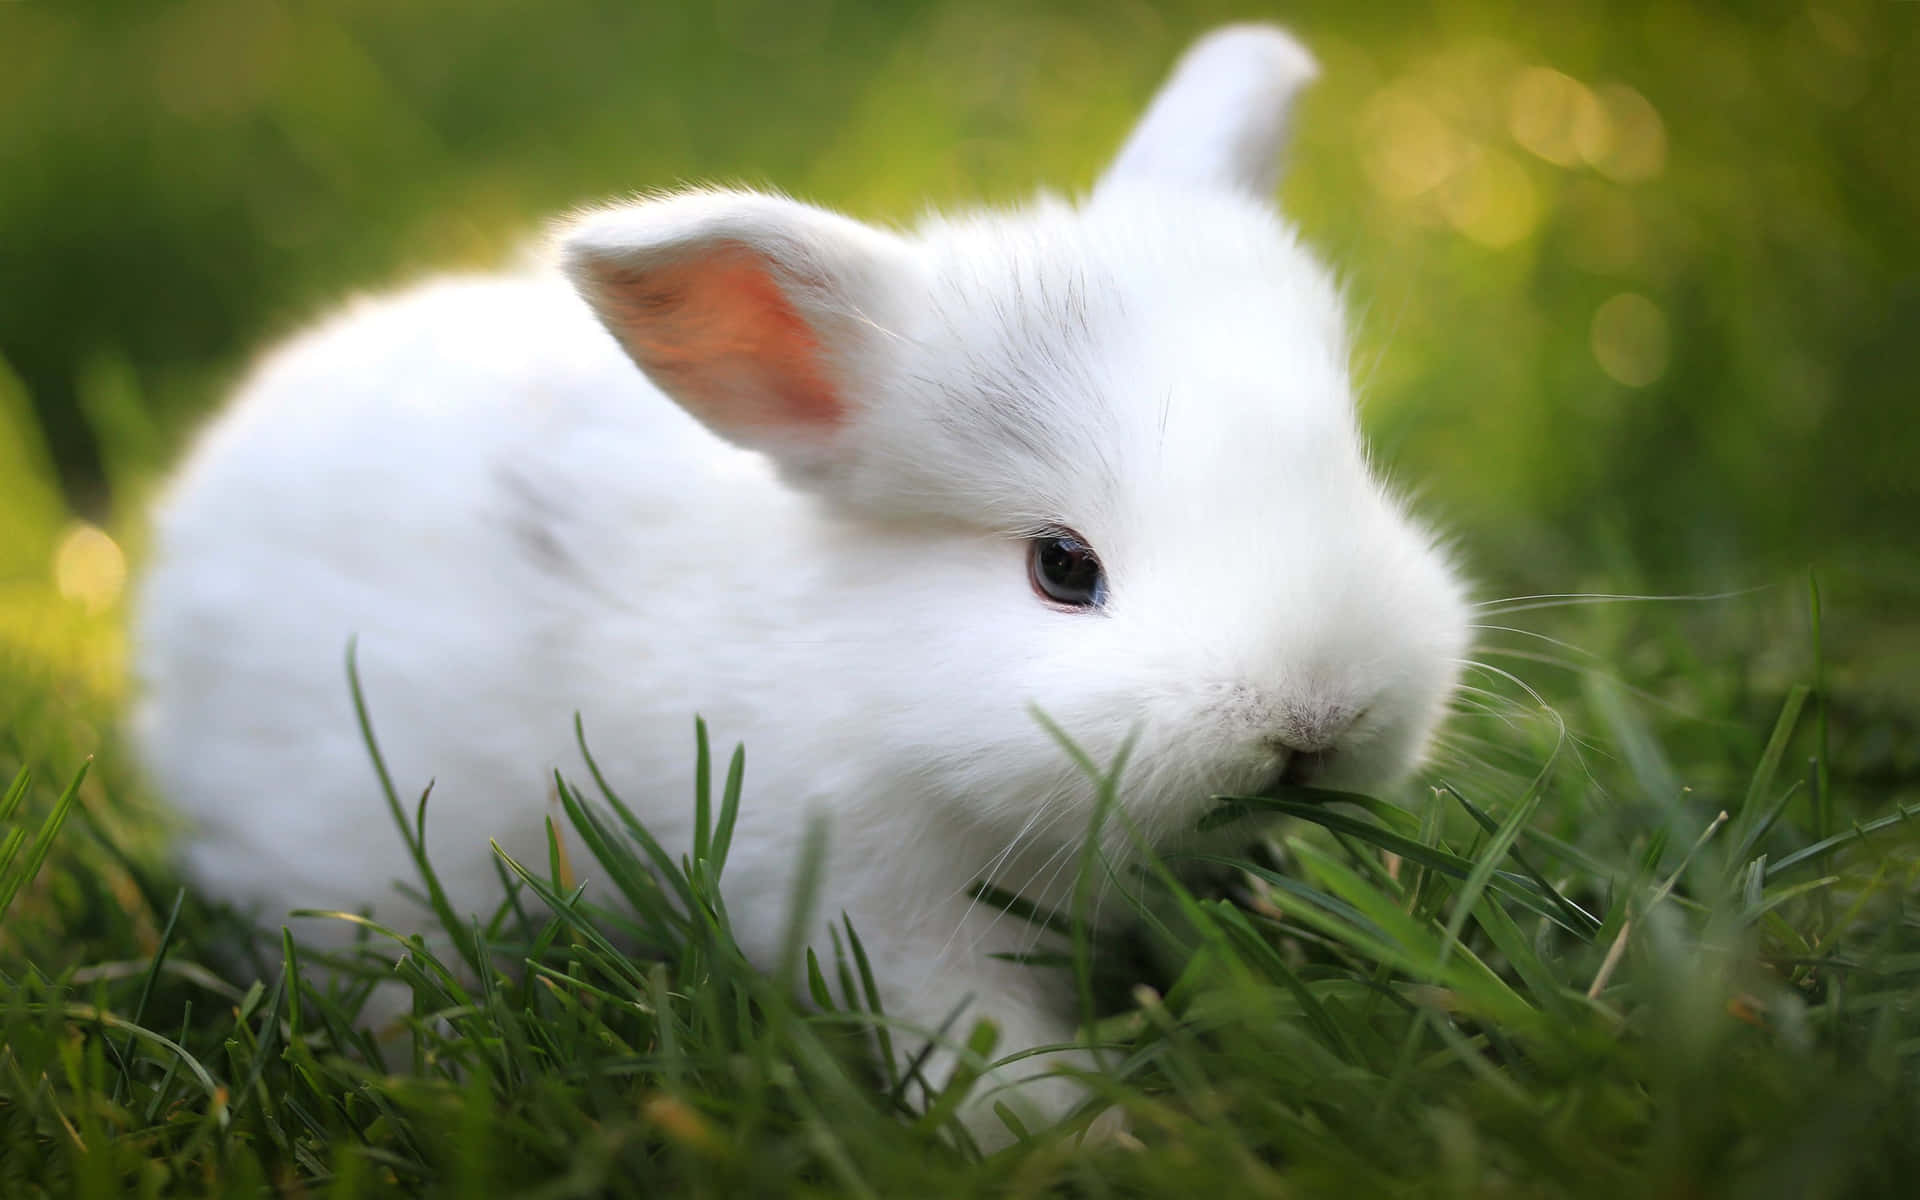 A cute and fluffy bunny admiring the beauty of nature